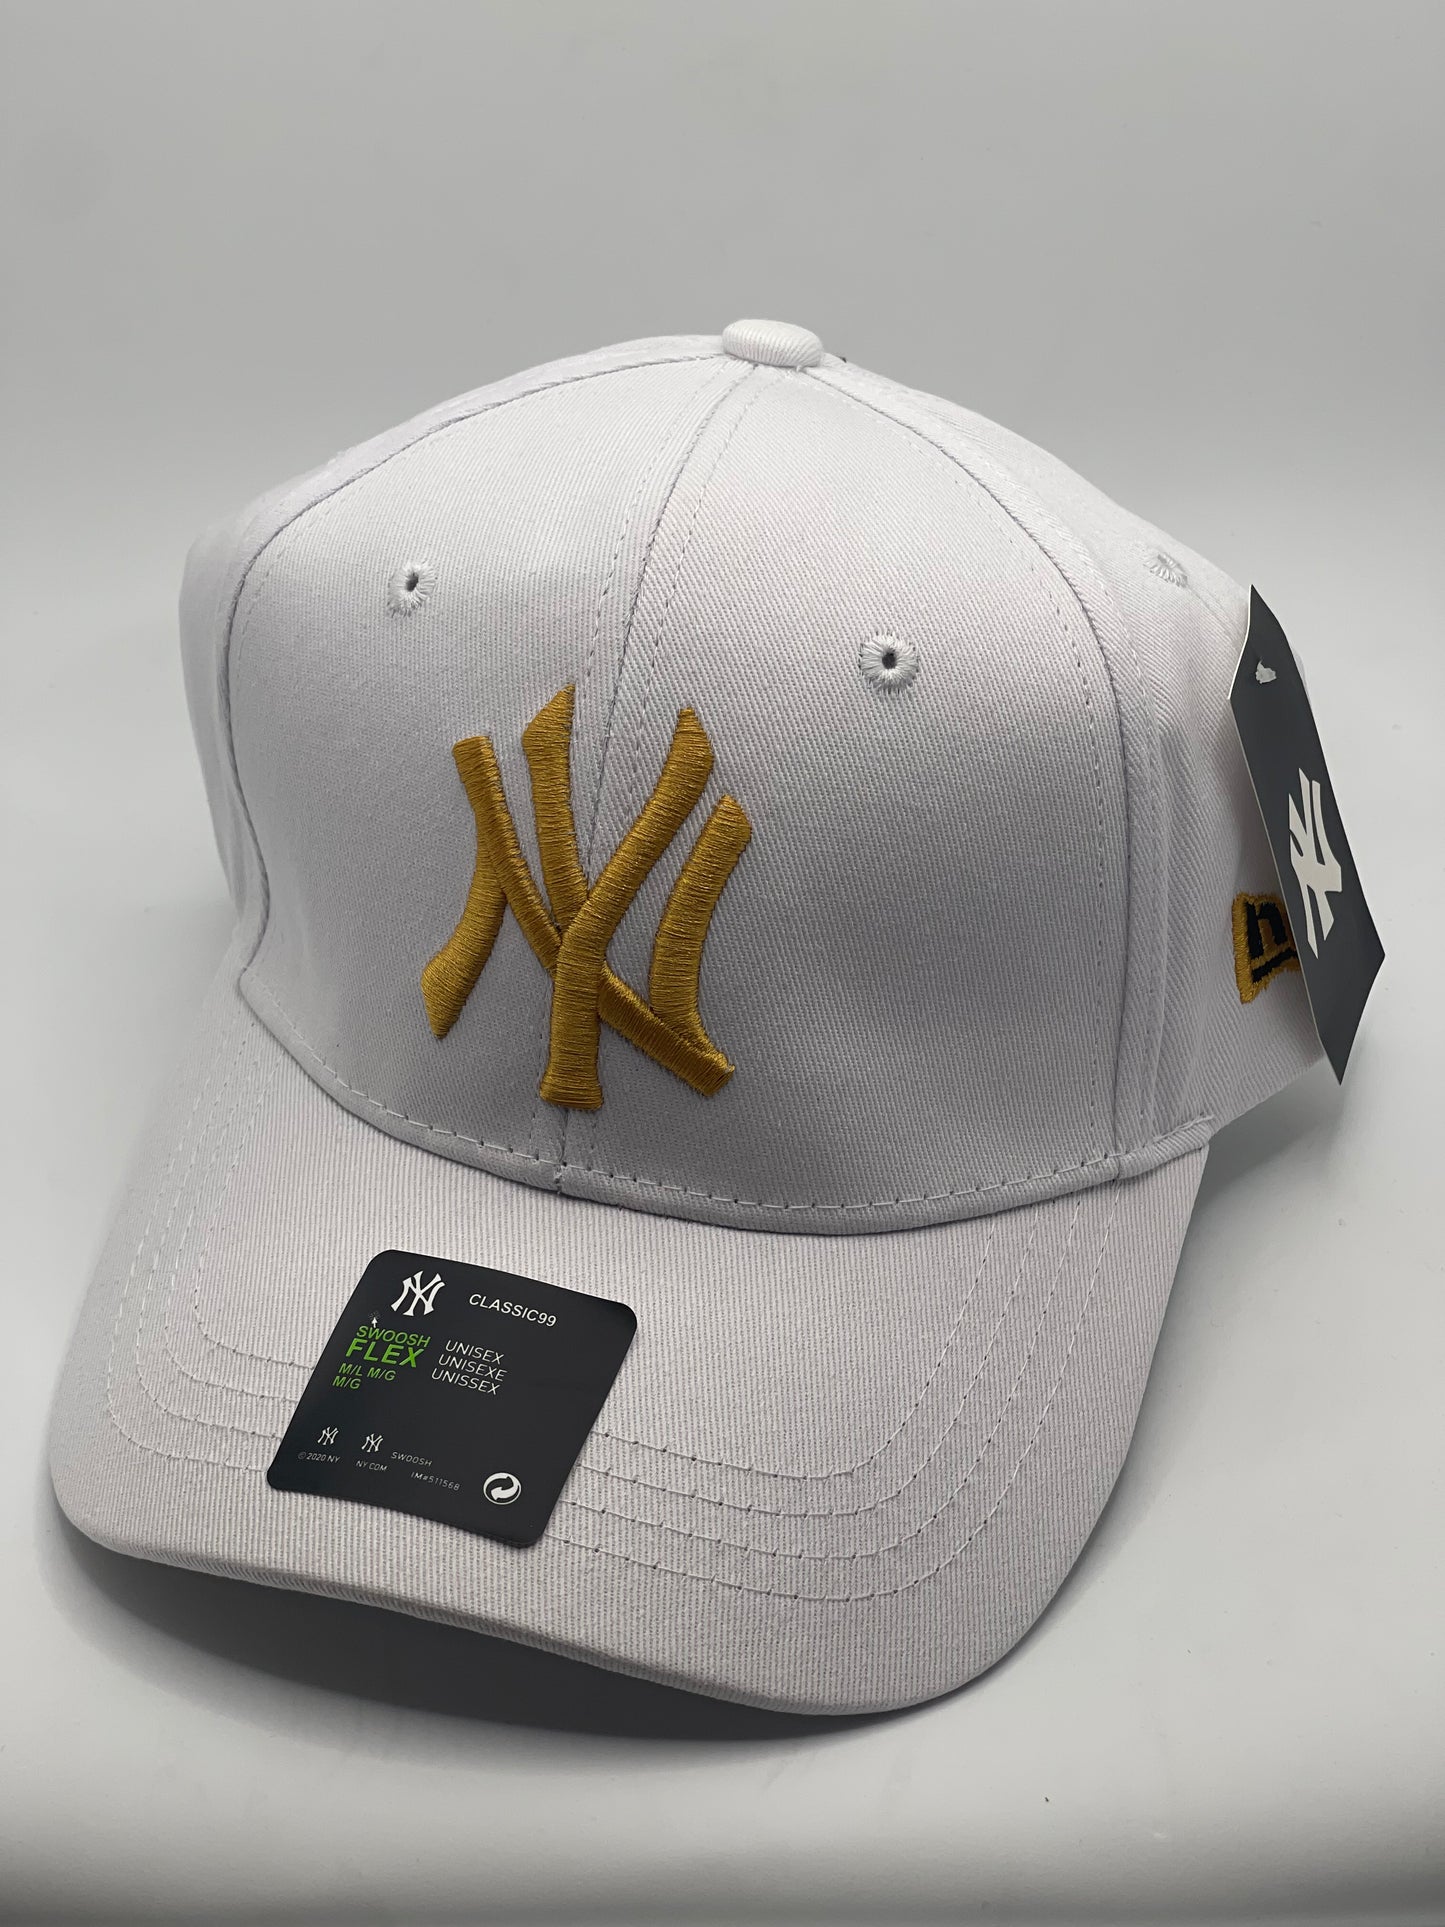 Classic99 Ny hat SWOOSH FLEX | – Crave Get You the UNISEX - Tophats Look